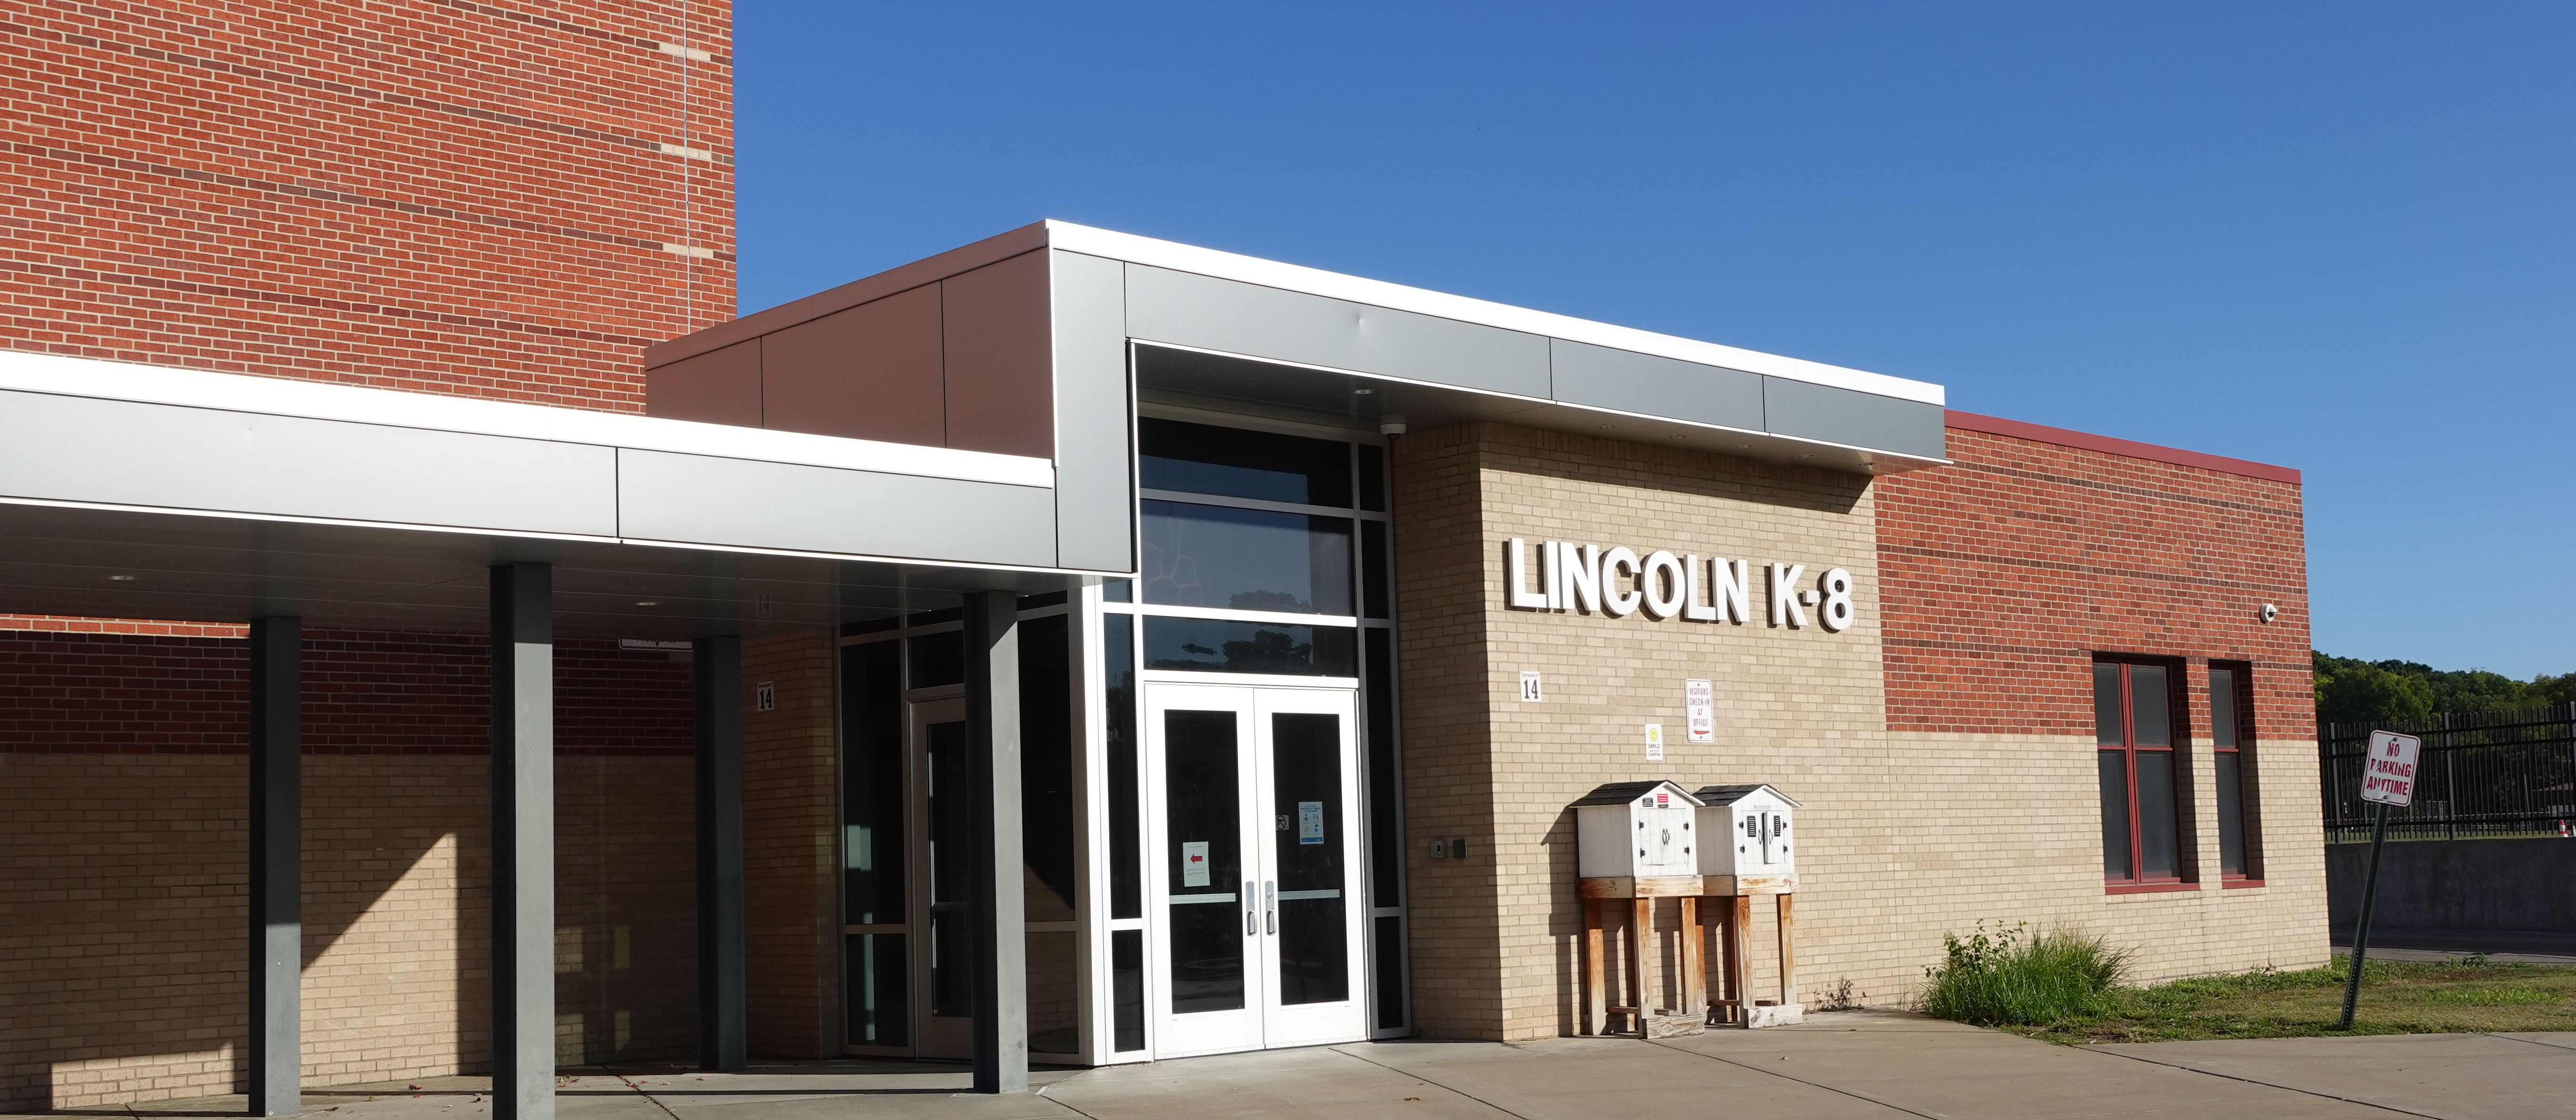 front of Lincoln School building